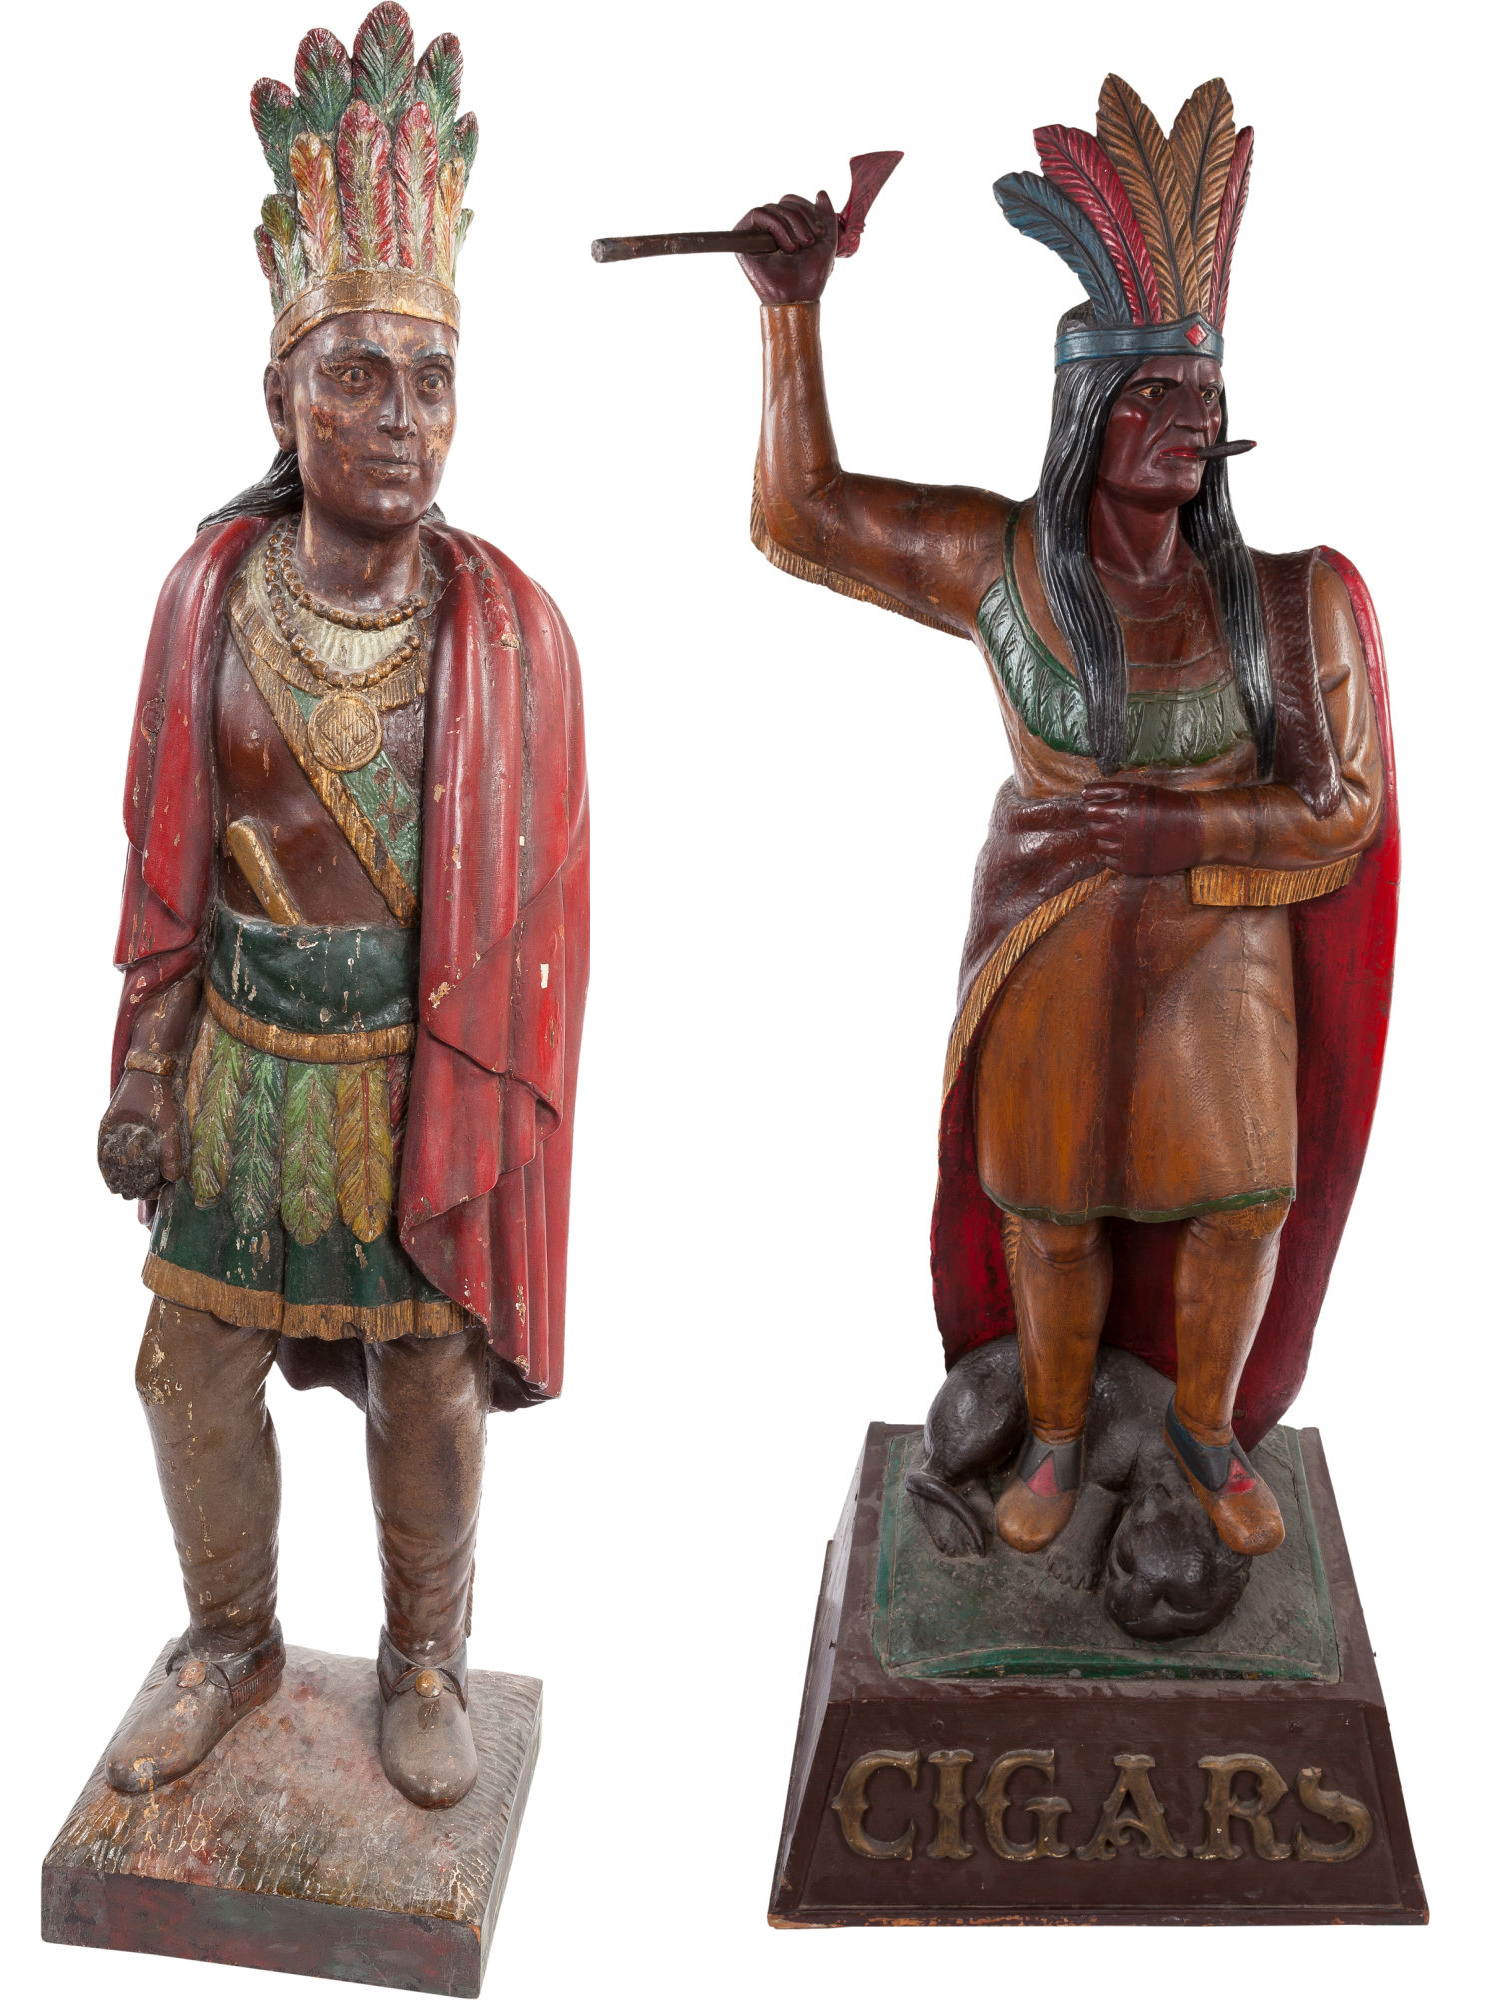 A diverse group of tobacconist trade figures sold for a combined $161,250, led by a 75-inch-tall Indian chief (left) in the style of Julius Melchers, which sold for $45,000. An impressive smoking Indian holding a tomahawk sold for $42,500.  Heritage Auctions image